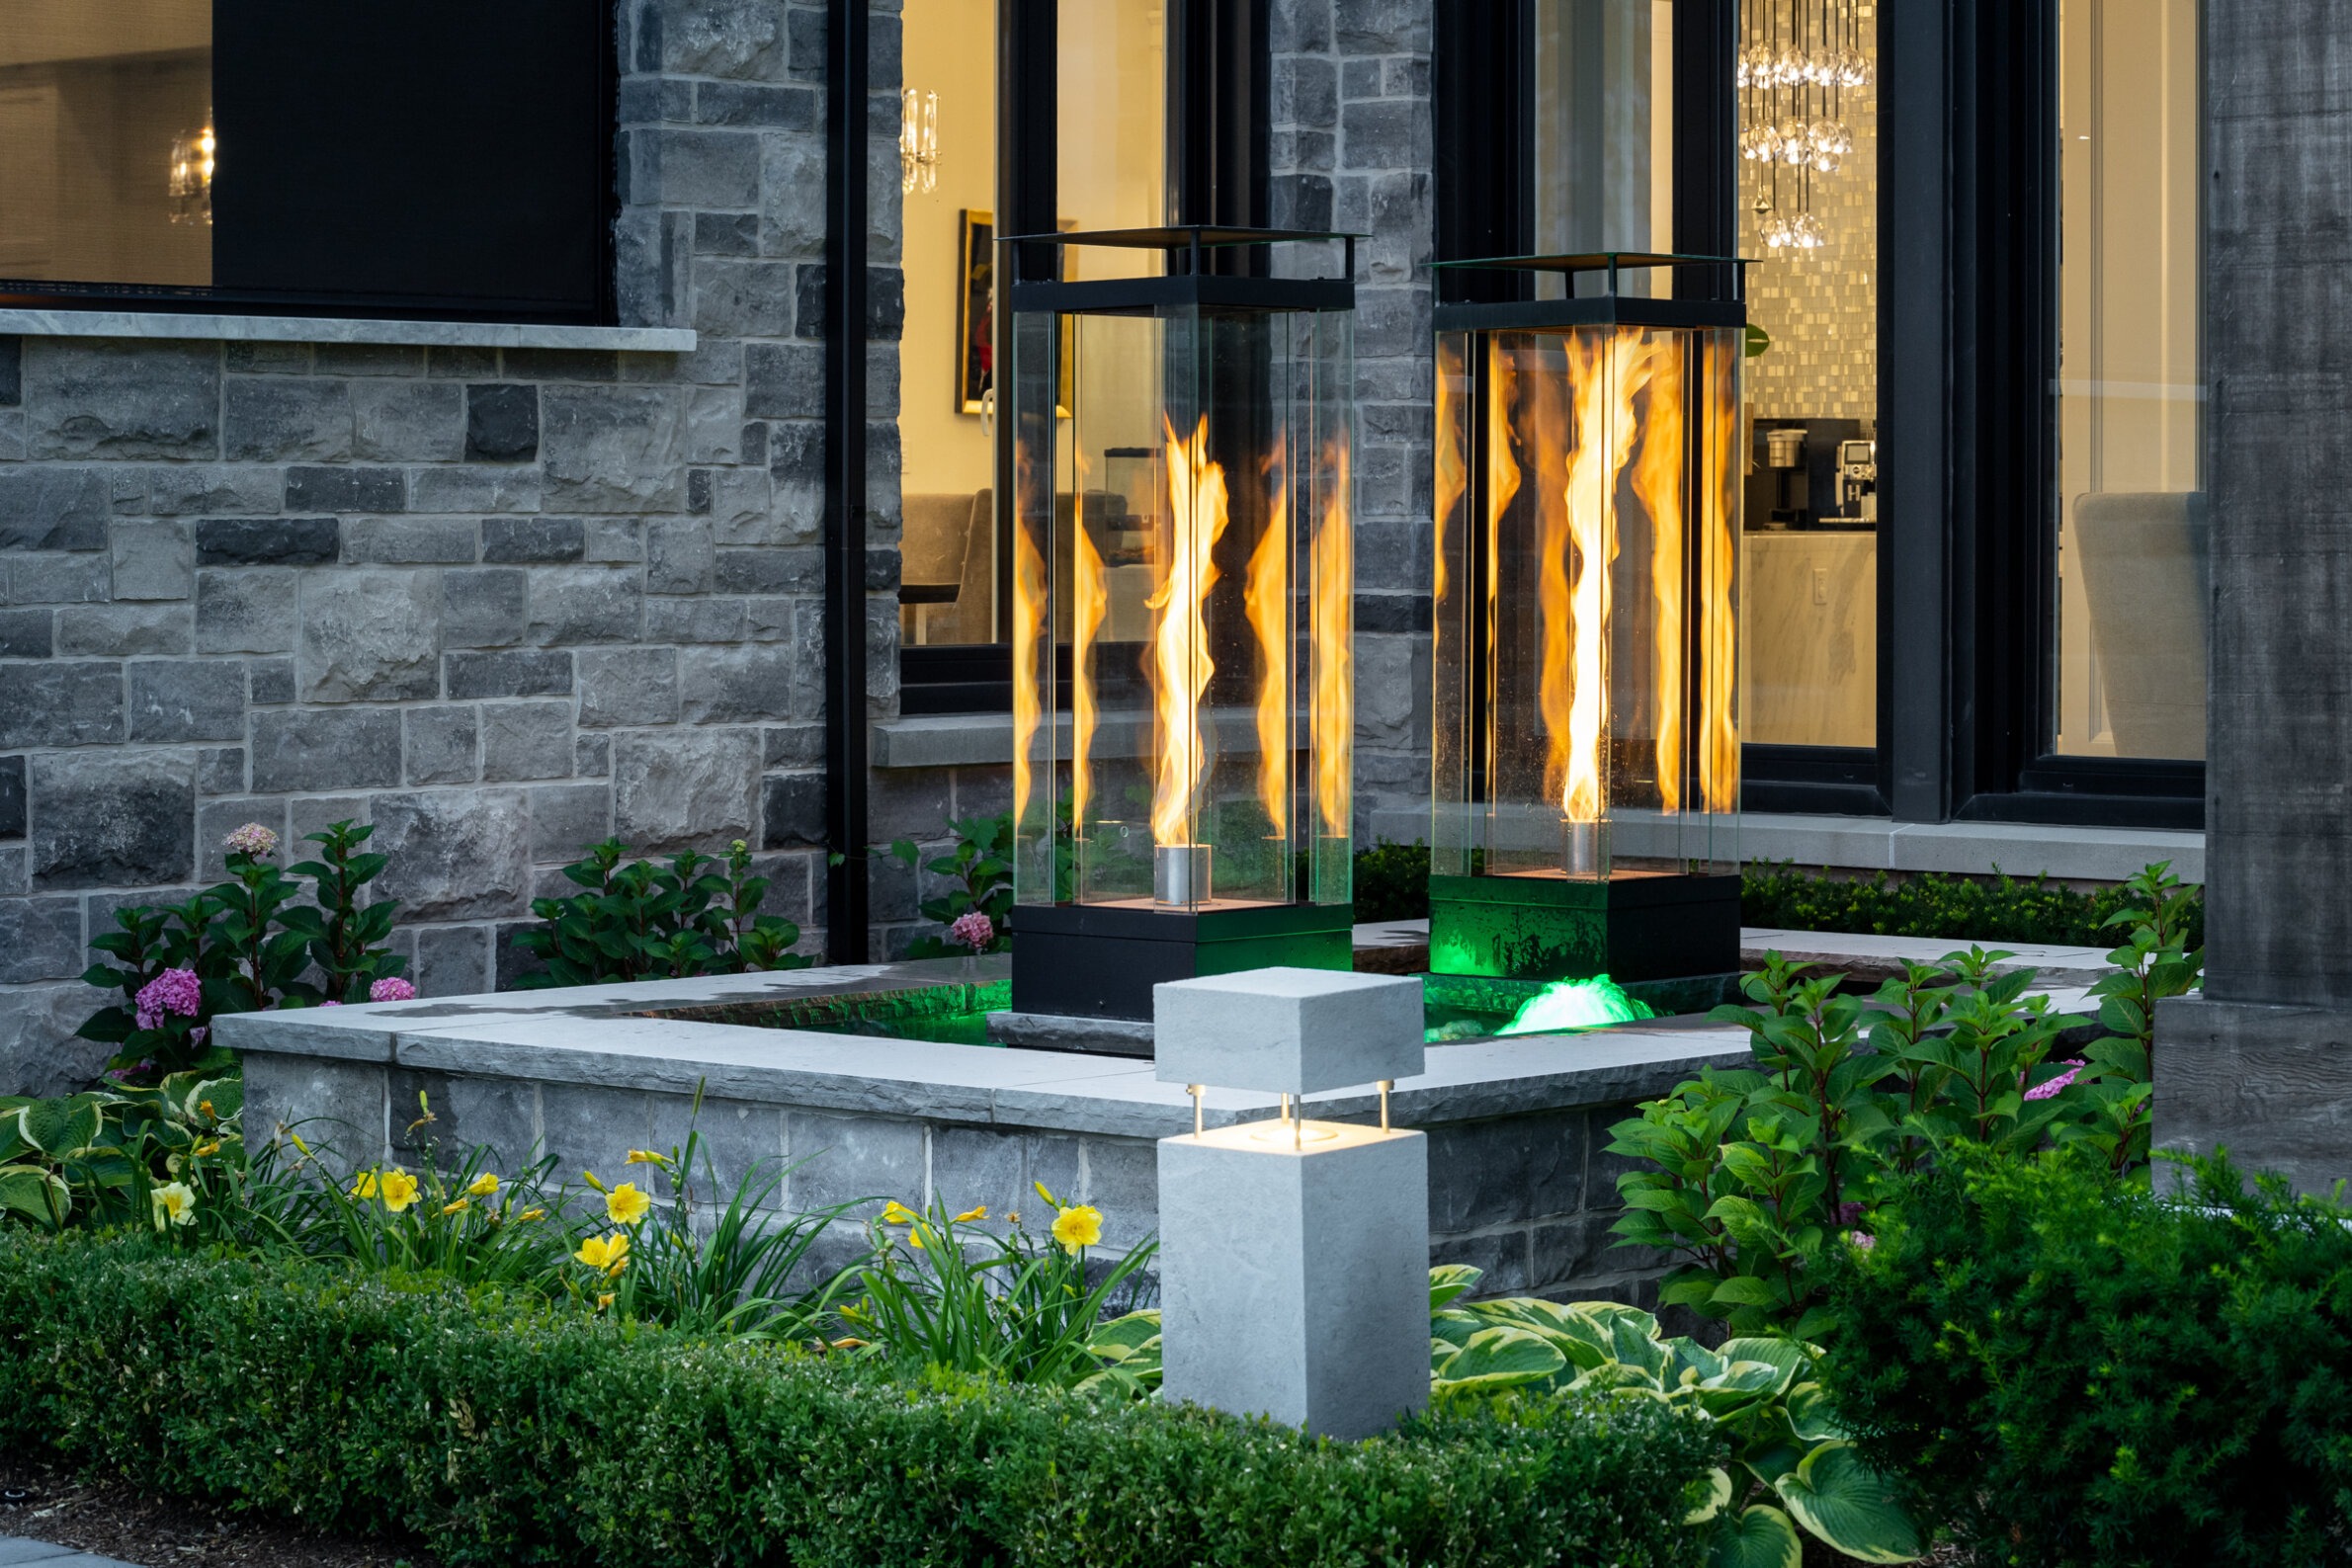 This image shows an elegant outdoor space with two large flame lanterns, greenery, and a modern house facade with reflective windows in the background.